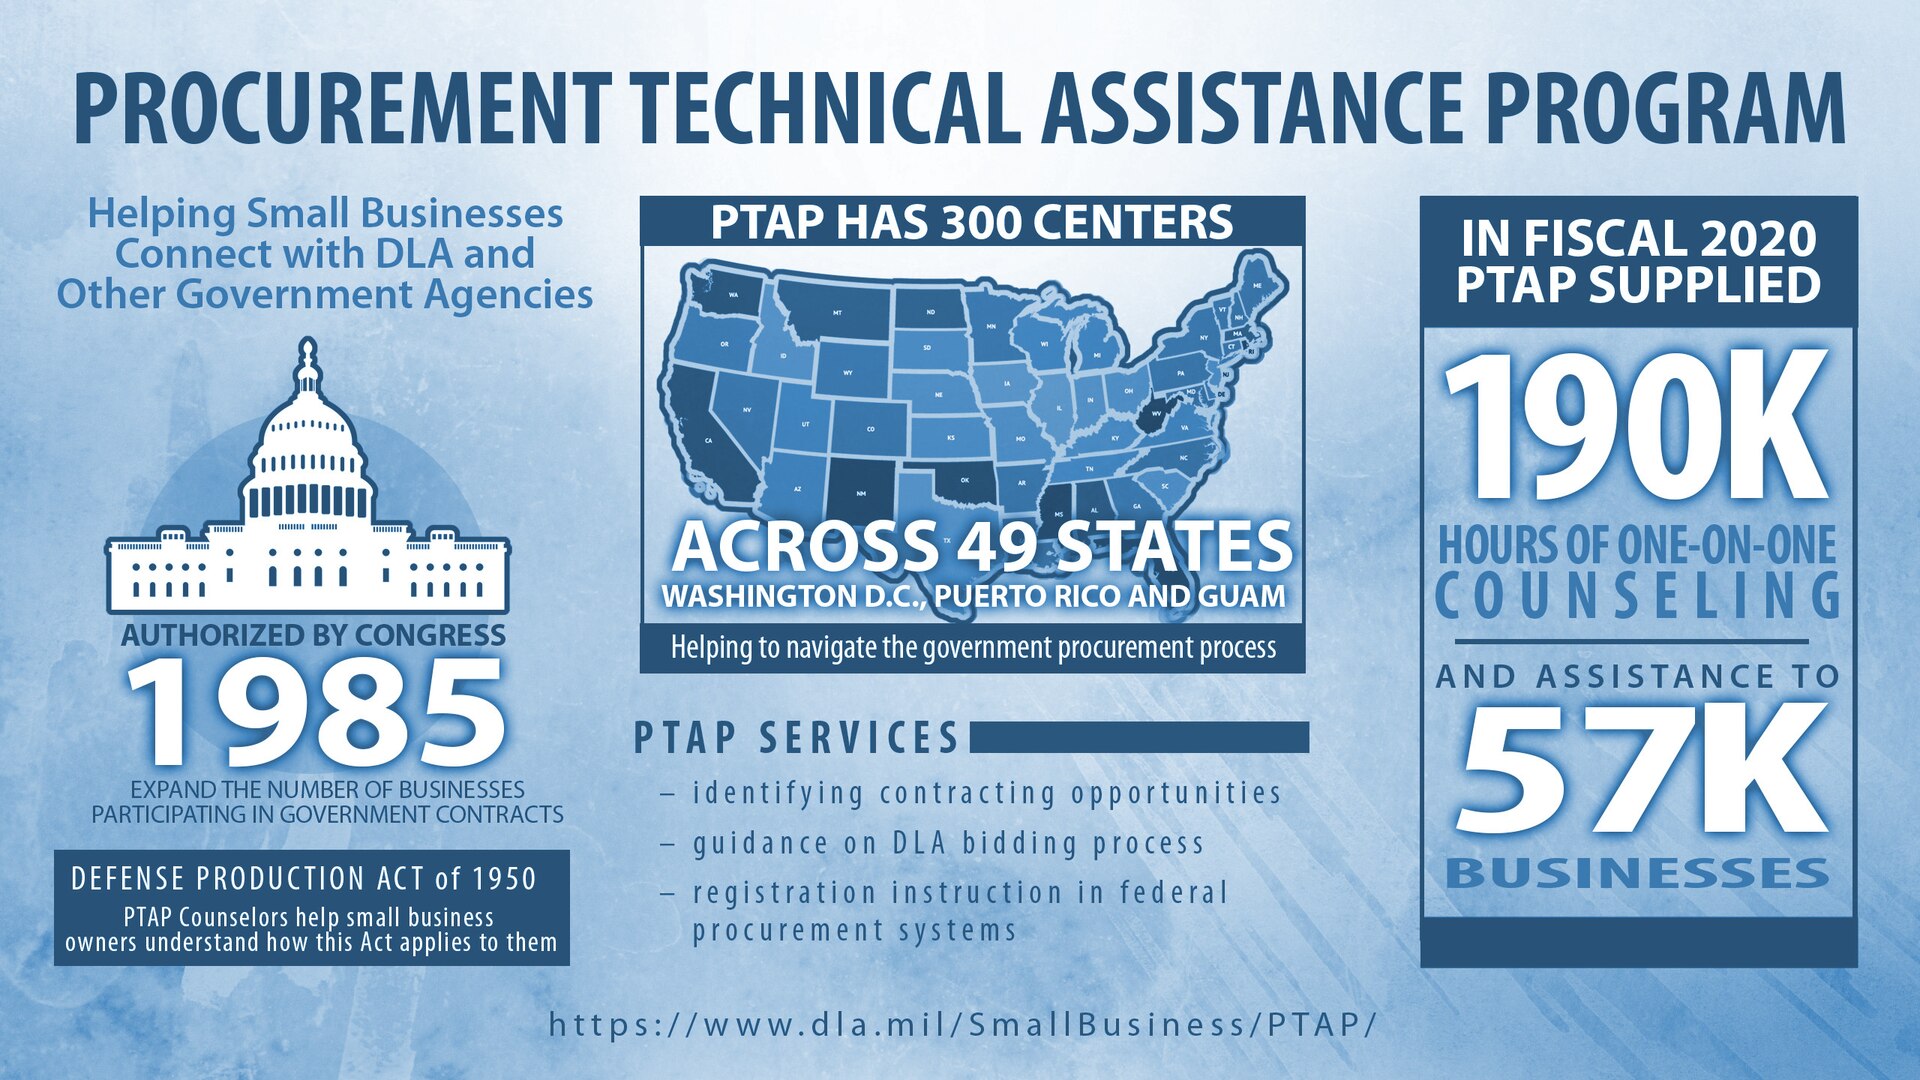 Graphic in blue and white depicting the presence of PTACs across 49 states with over 190 thousand hours of counseling going to 57 thousand businesses in 2020.